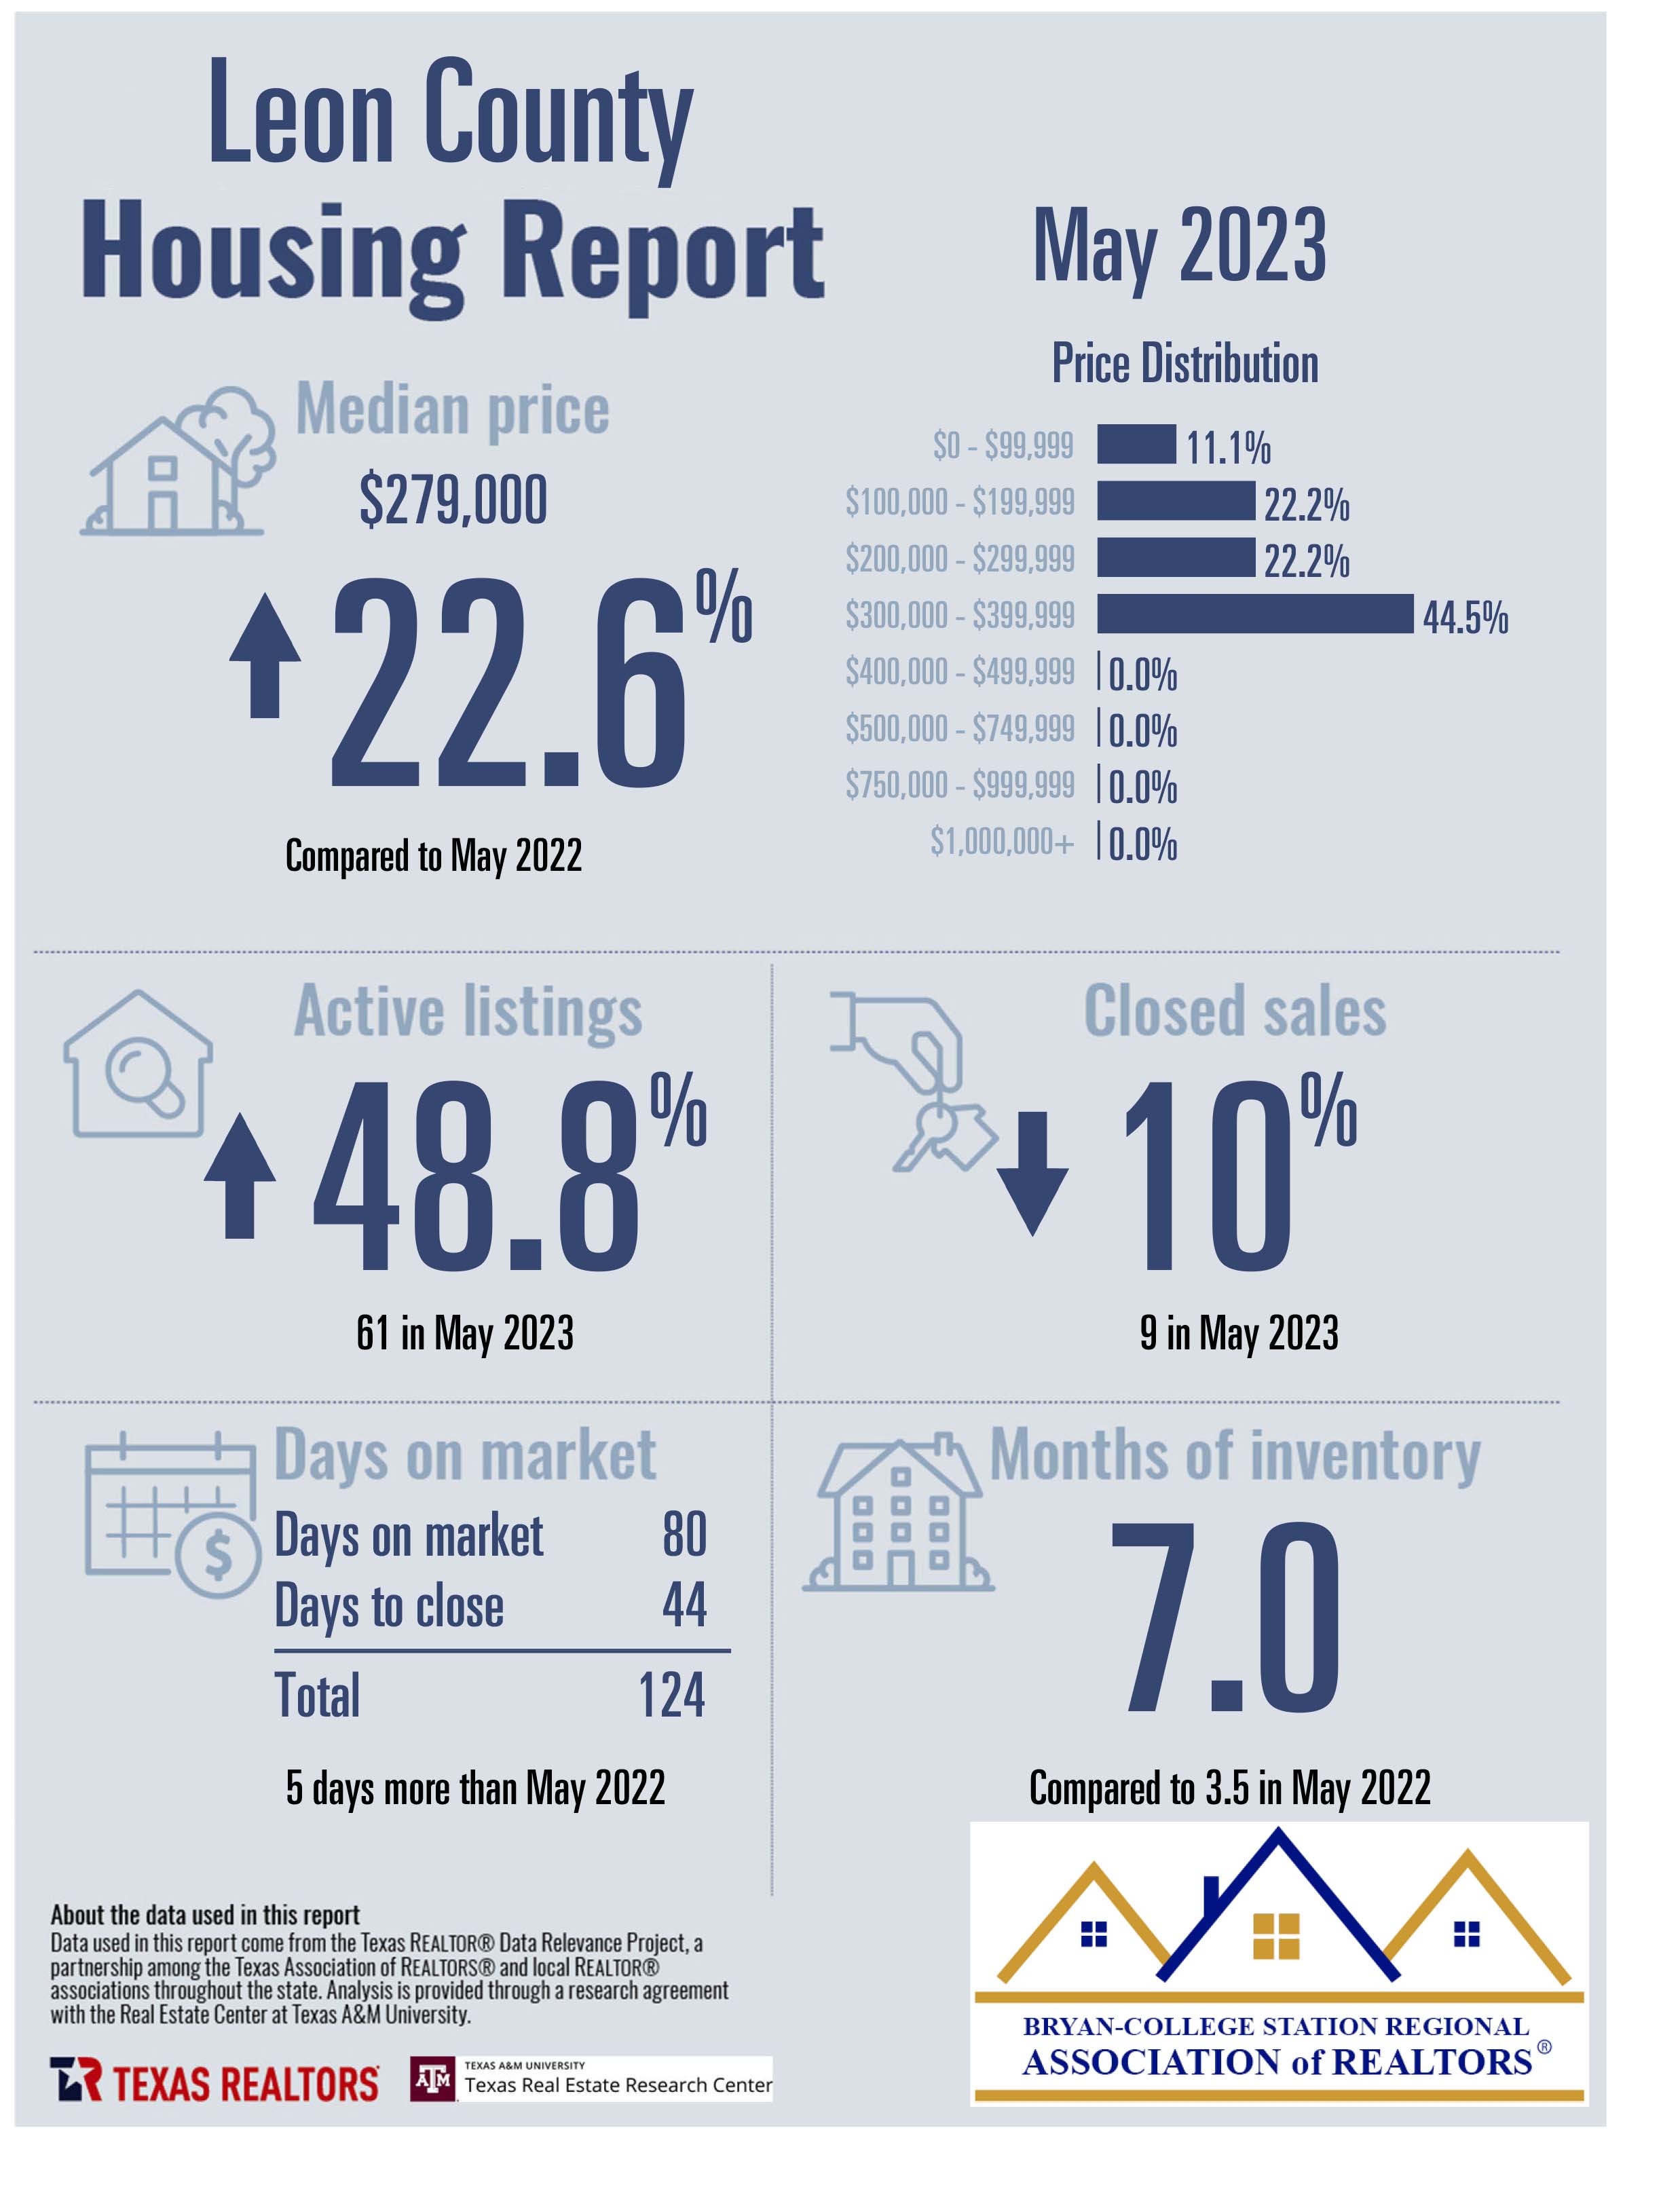 Residential Home Sale Report may 2023 - Leon